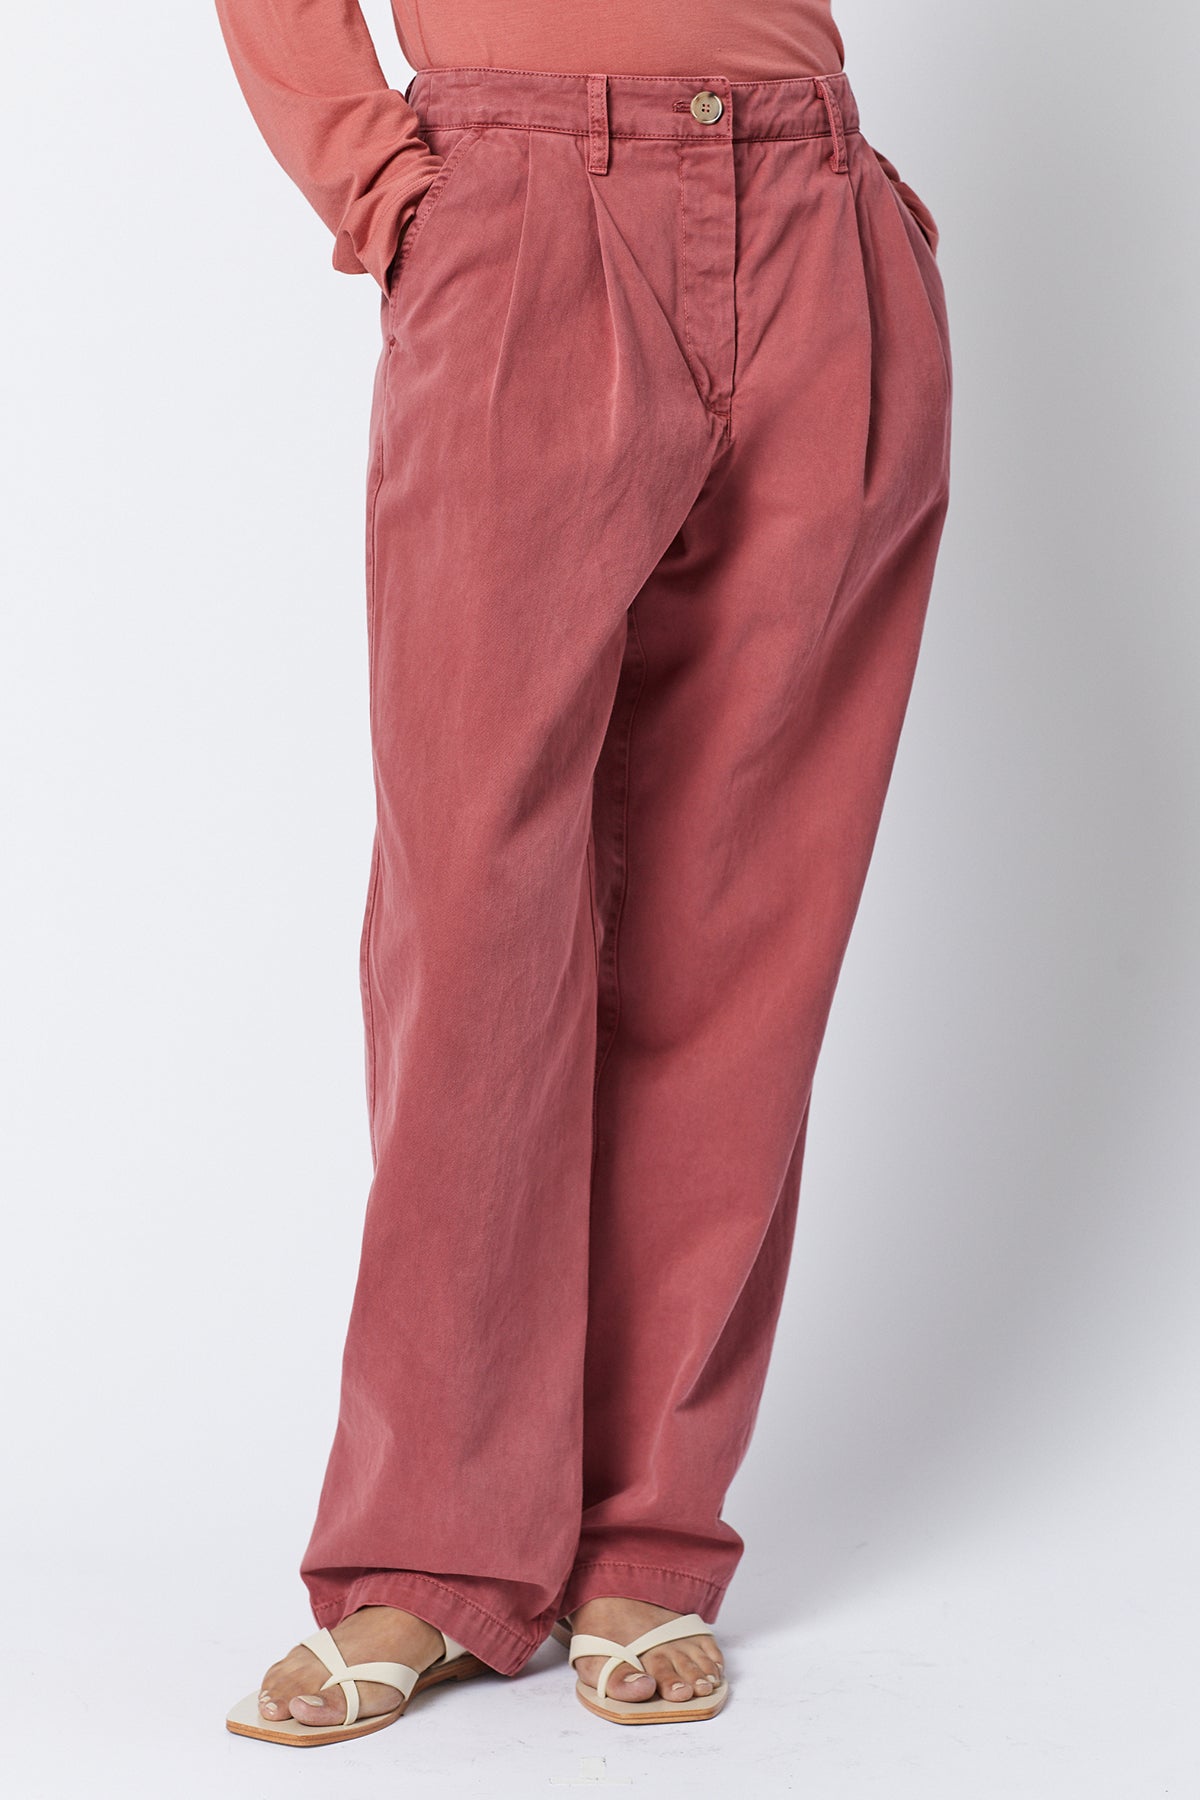   Temescal Pant in femme front 